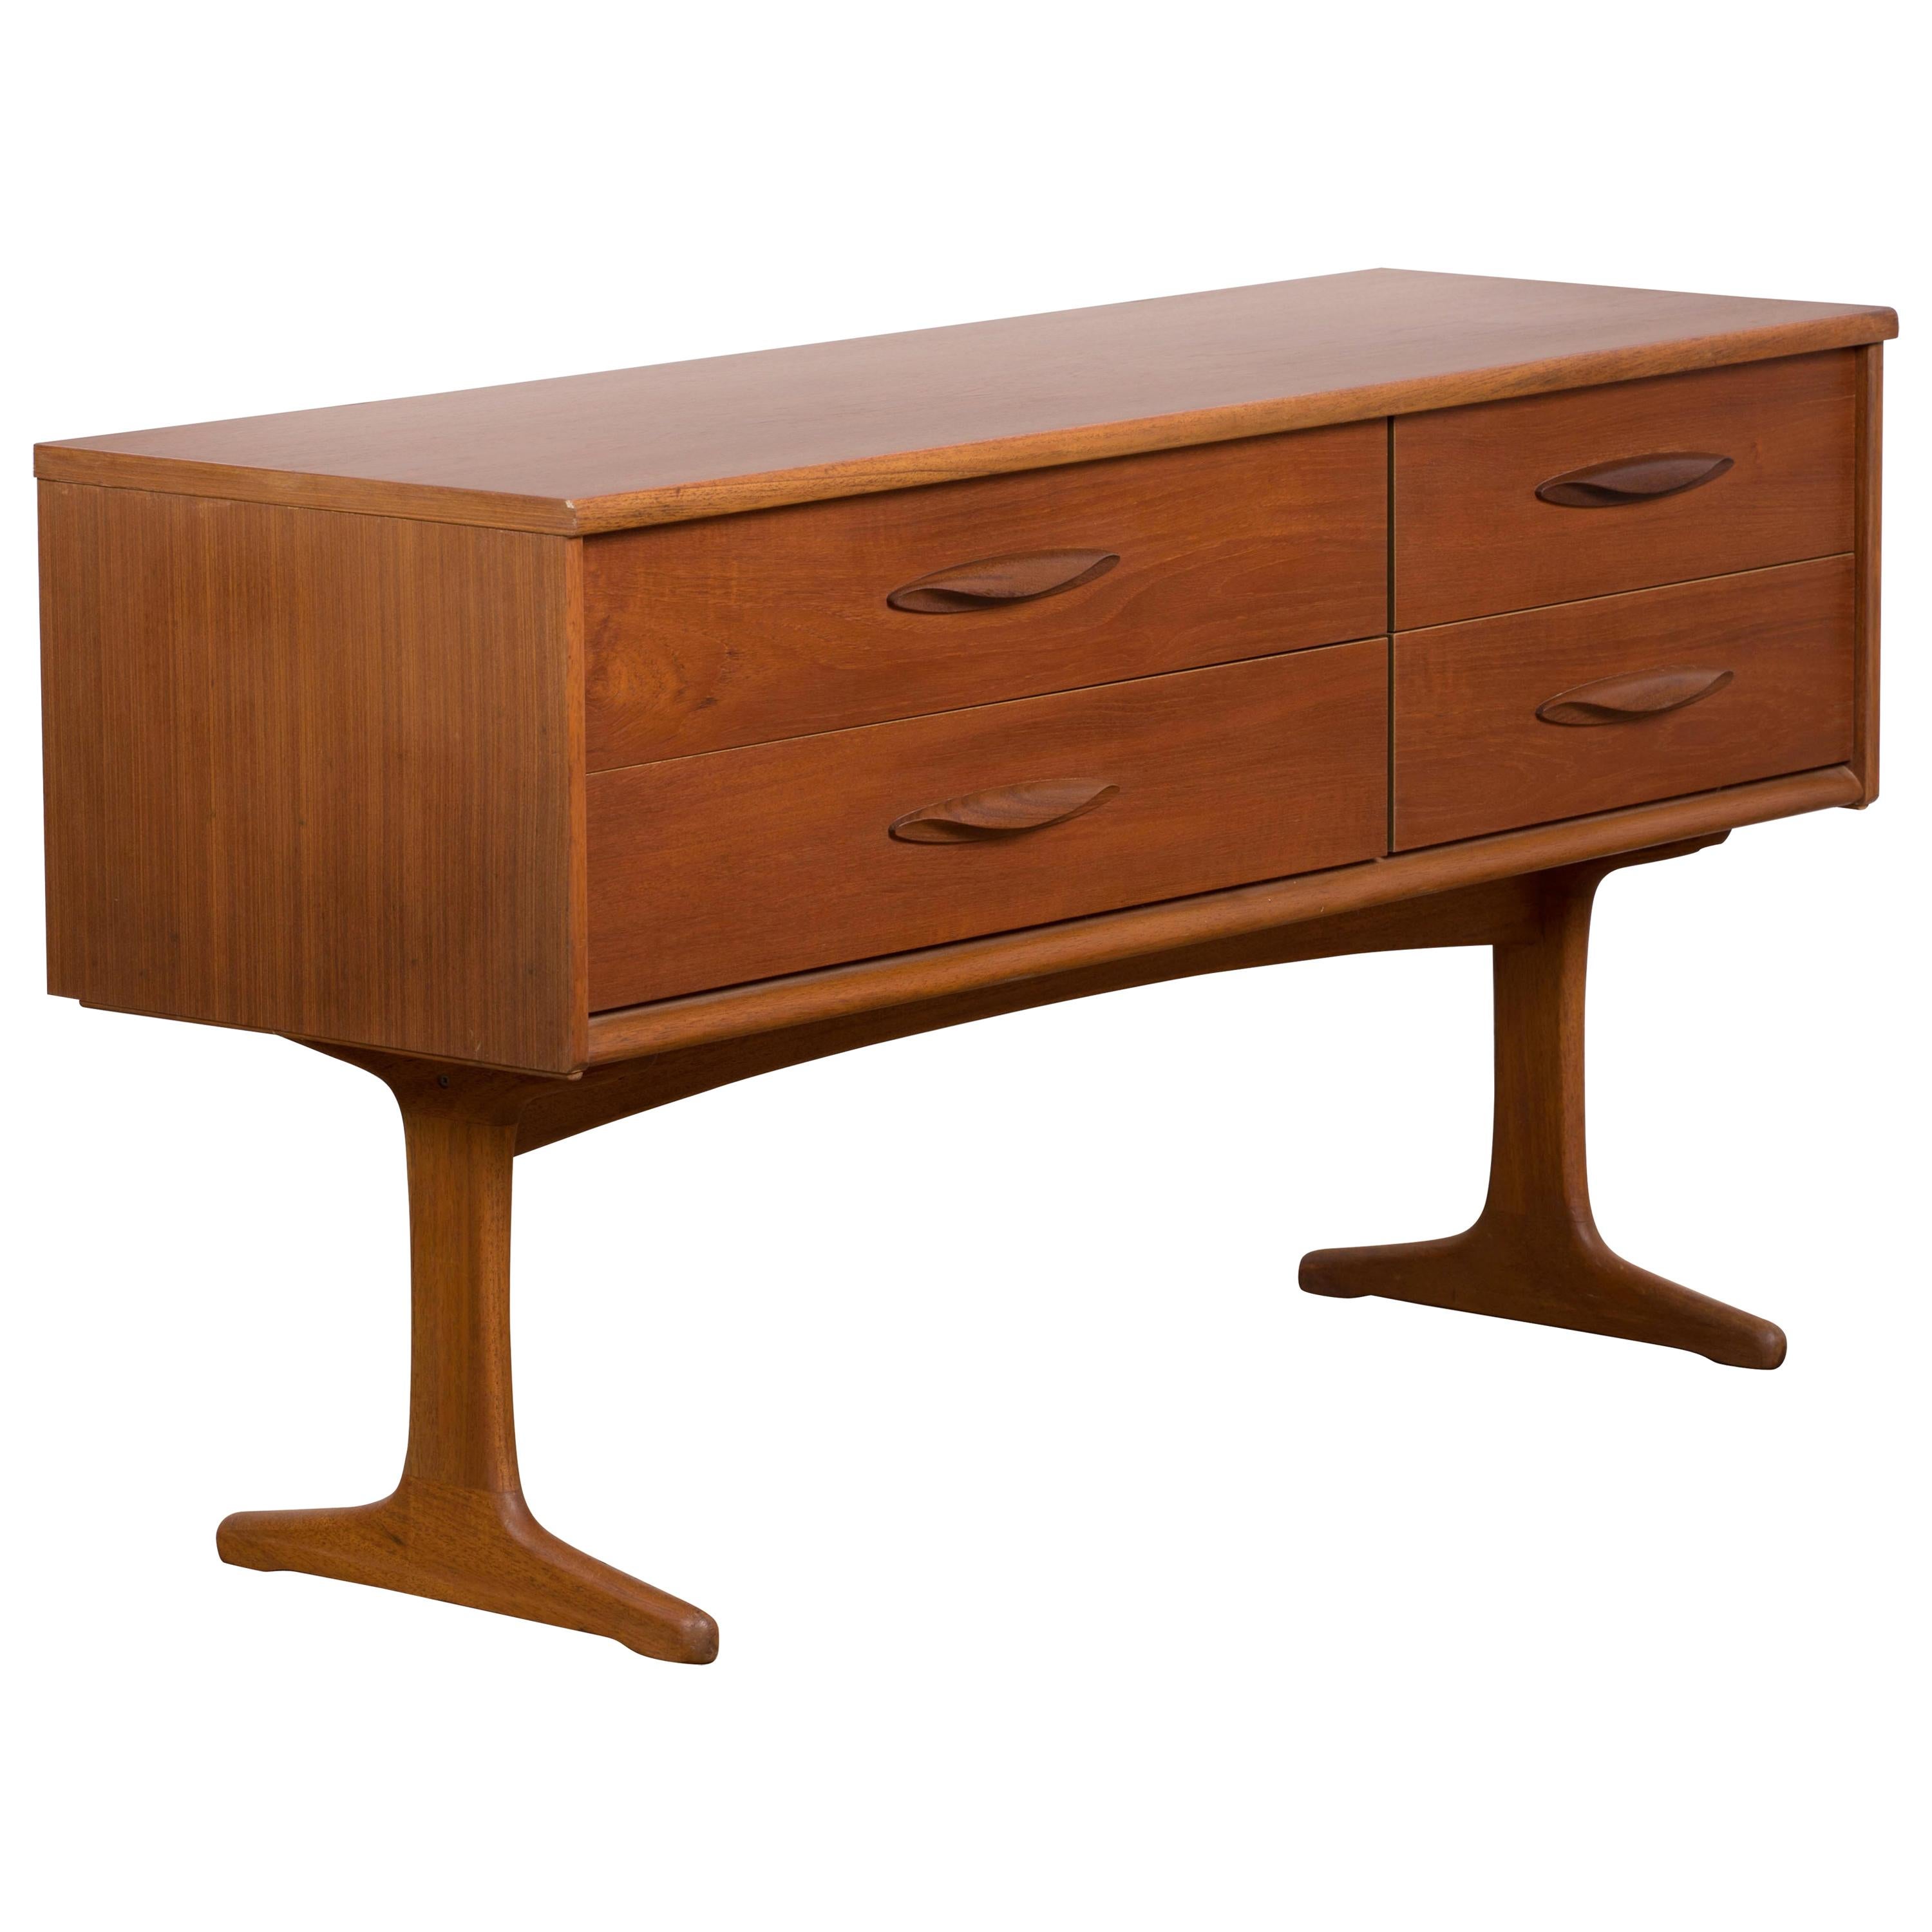 Mid-20th Century Teak Sideboard Designed by Frank Guille